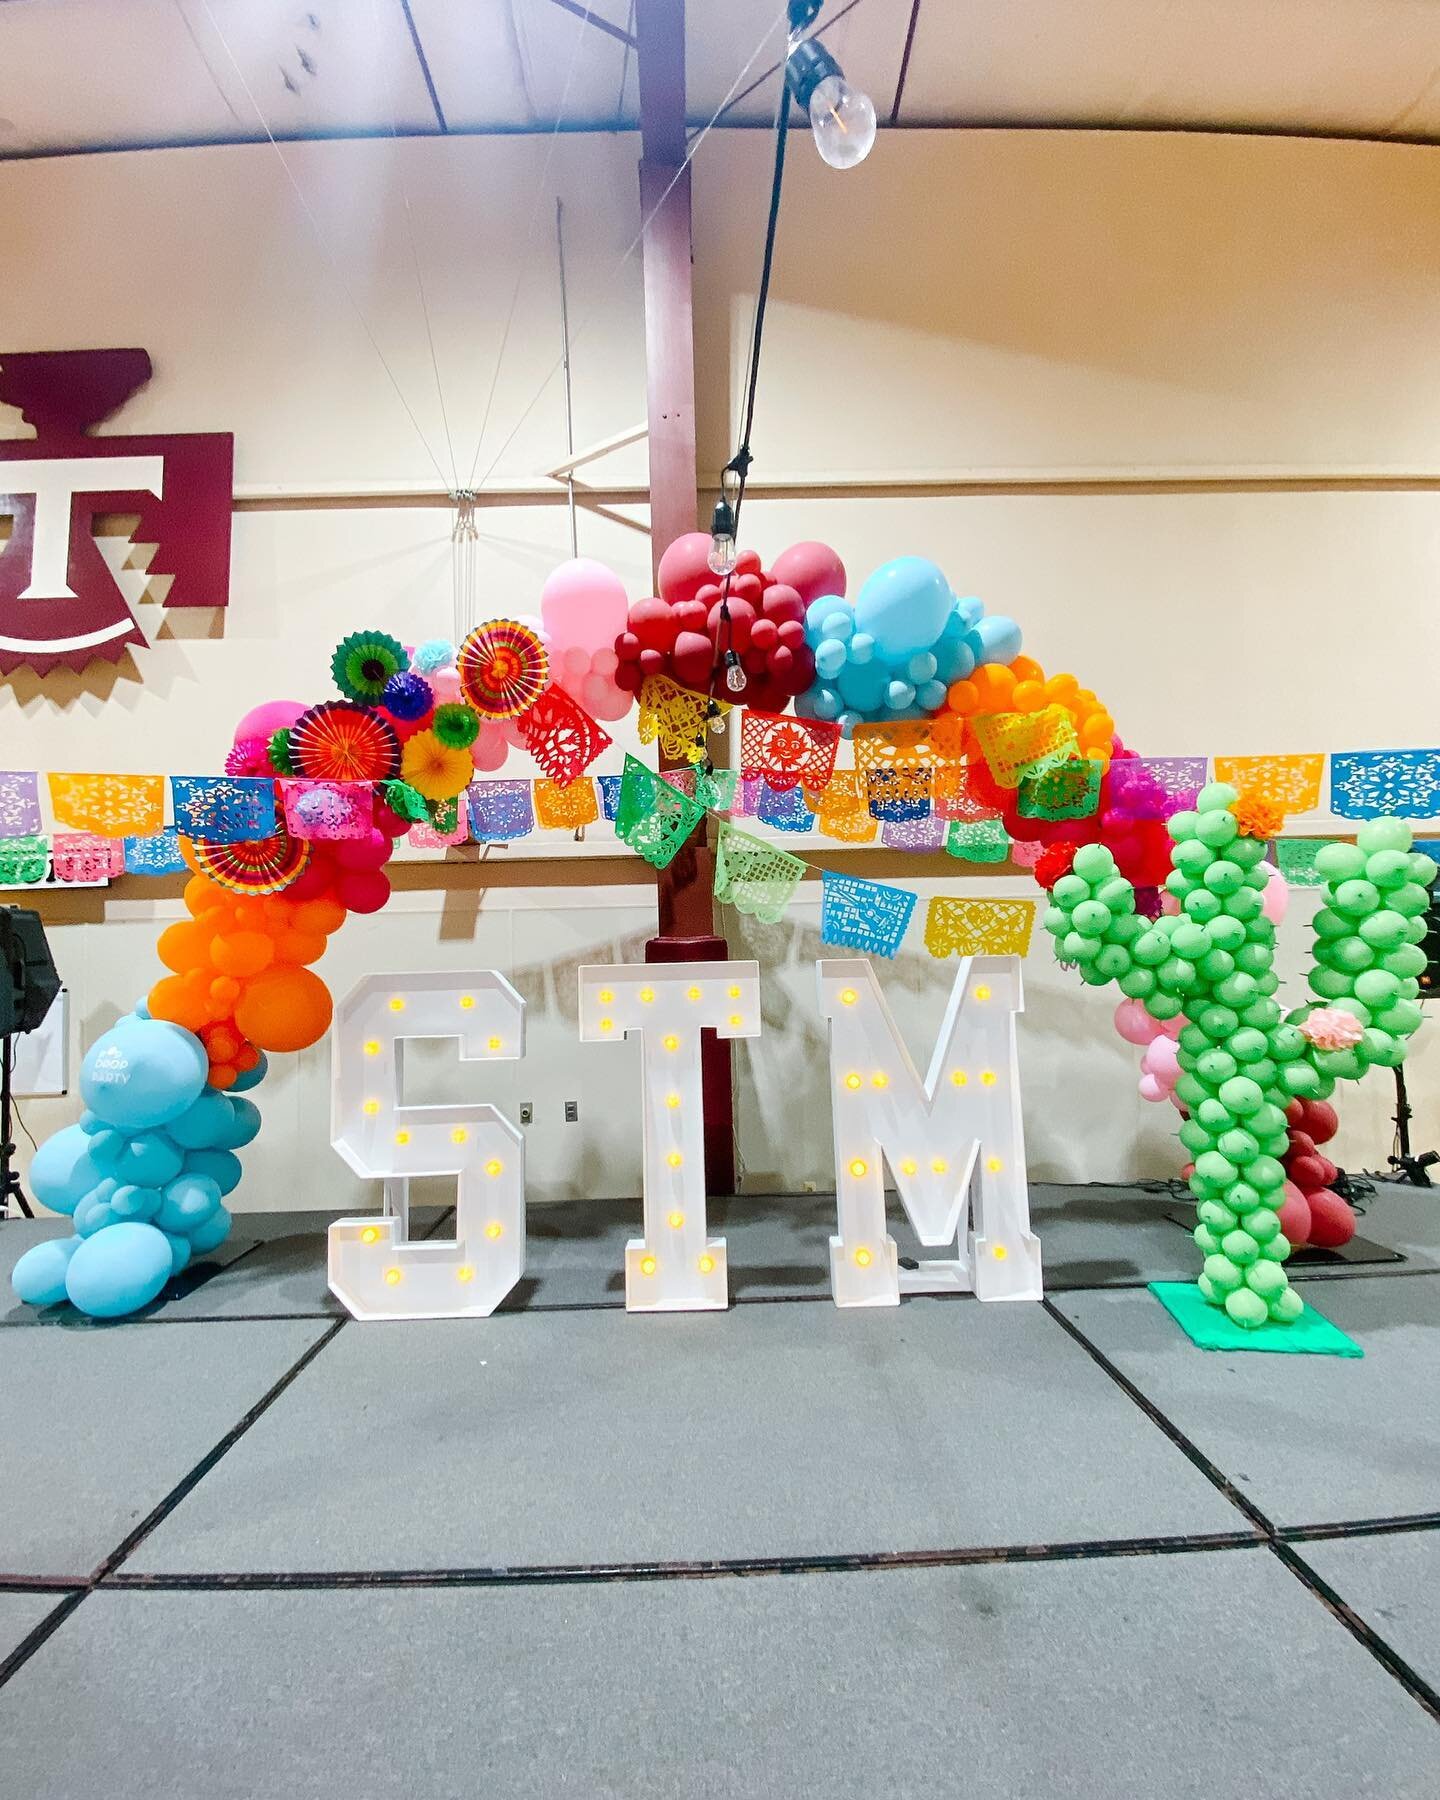 💃🏼 Fiesta De Auction 💃🏼 
The St. Mary&rsquo;s School Annual Auction called for a BIG display and what better way to add a focal point to an event than our 25&rsquo; Balloon Arch! 🤩 The life size cactus was the perfect finishing touch. 🌵 

Inter